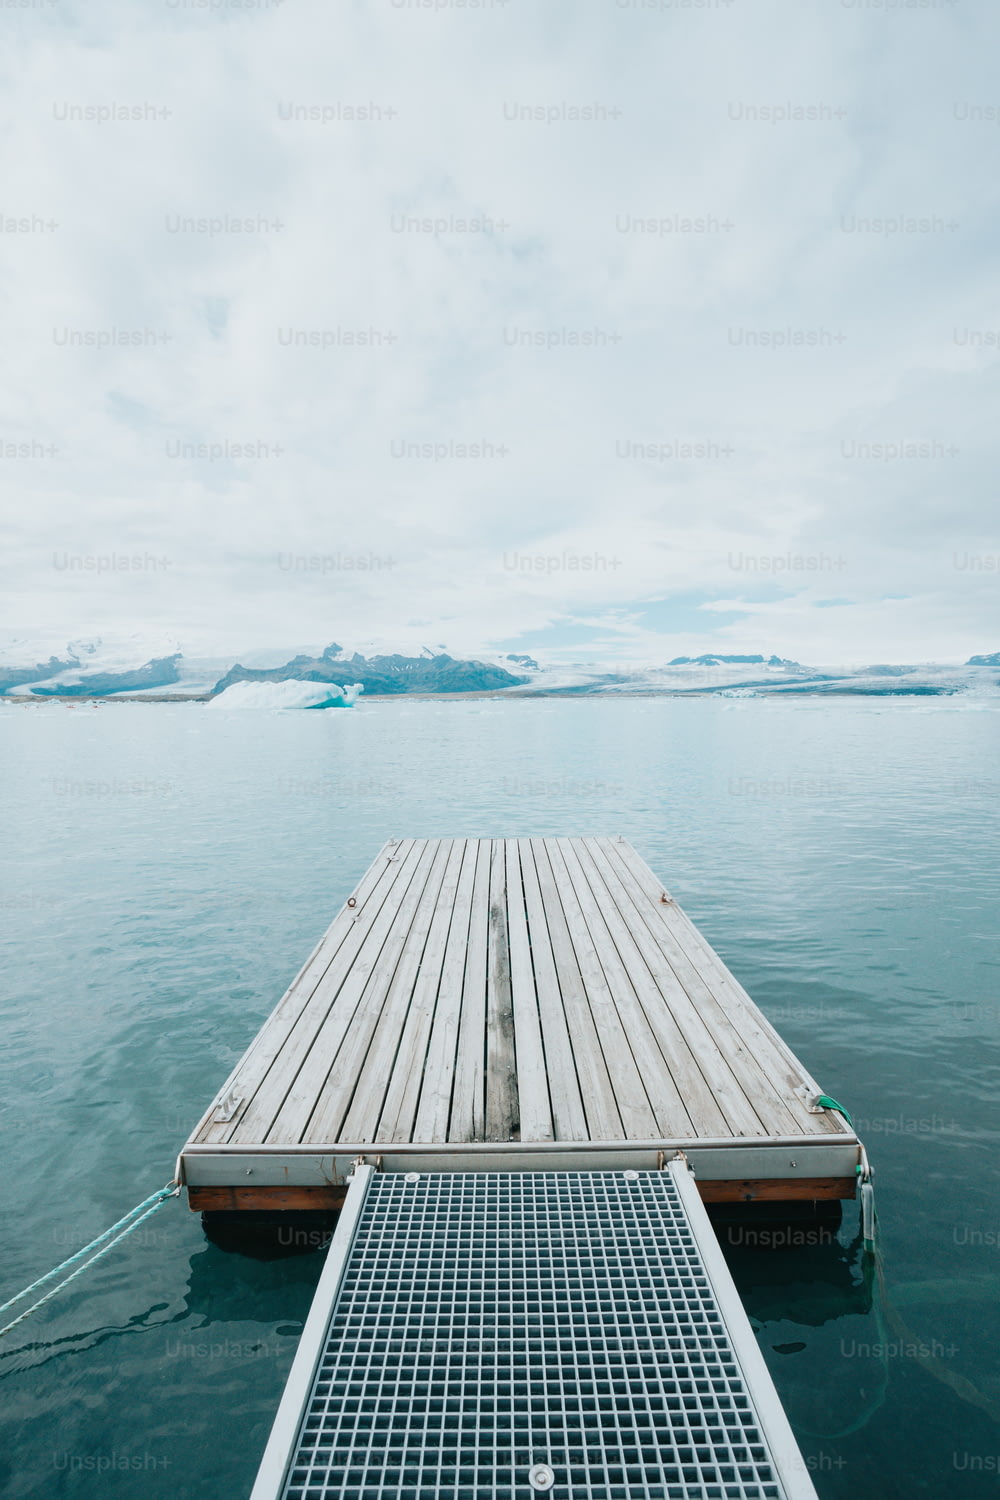 a wooden dock sitting in the middle of a body of water